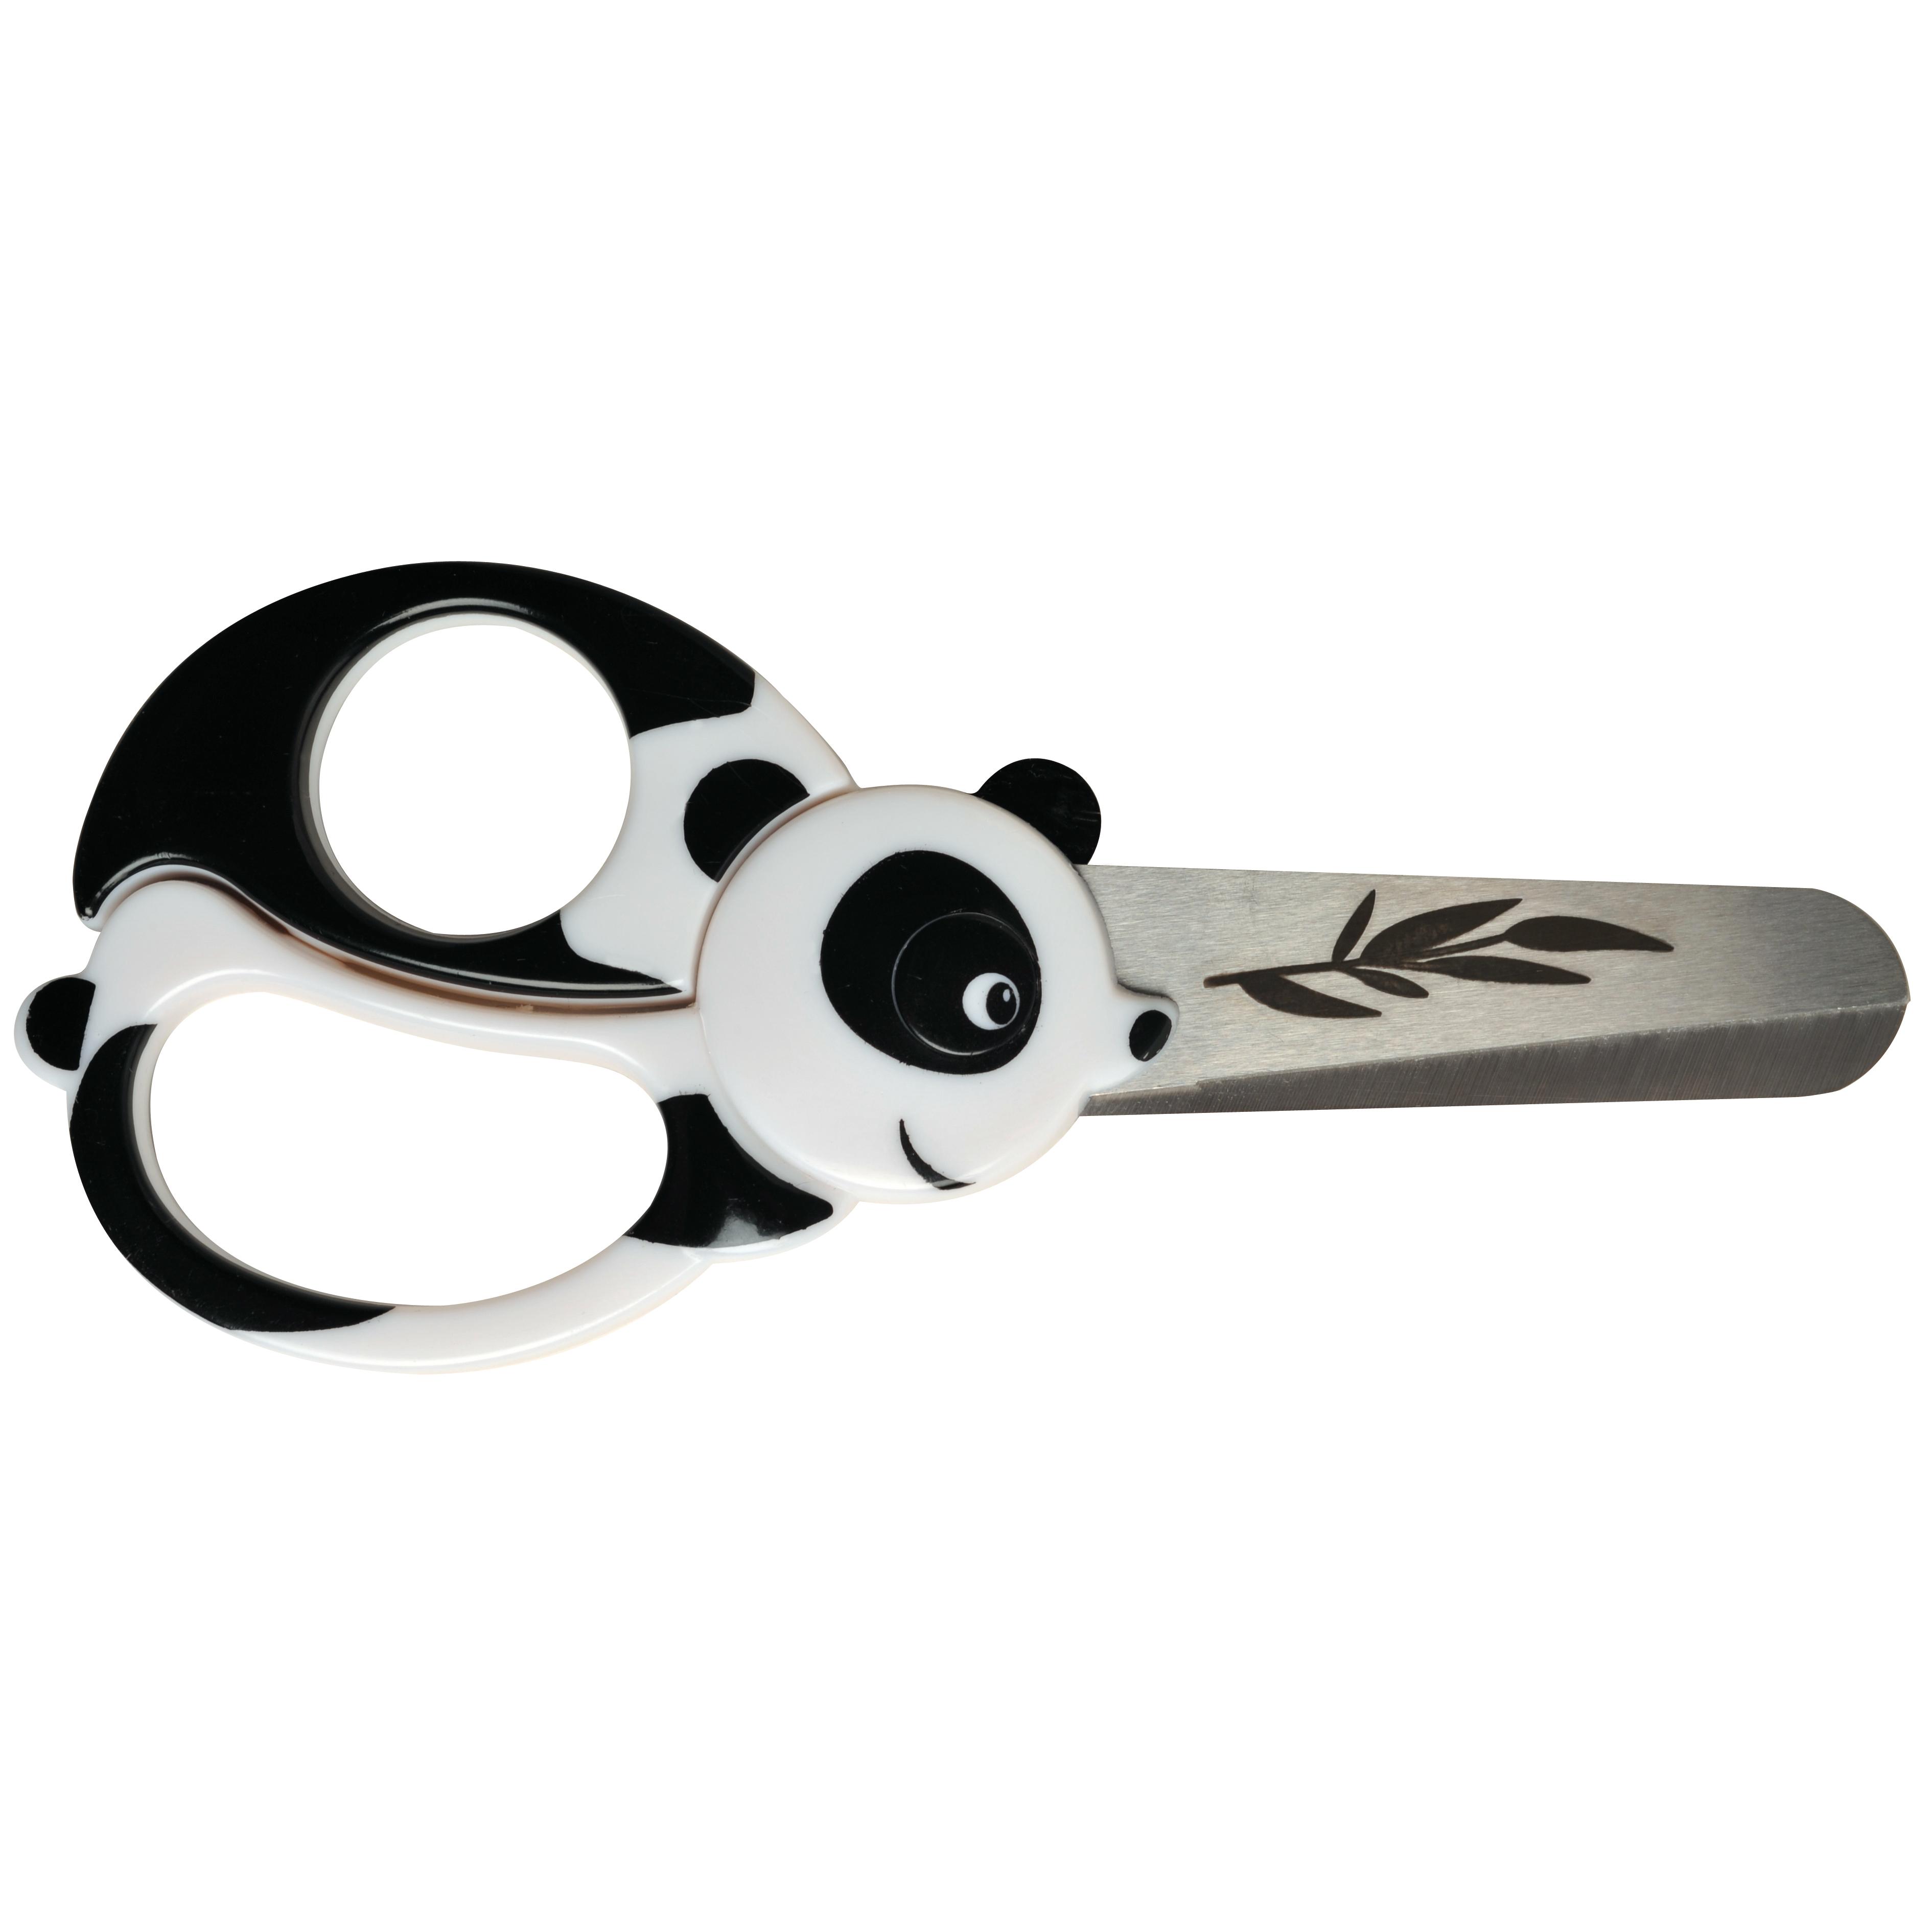 5 Pointed Tip Scissors – Child's Play